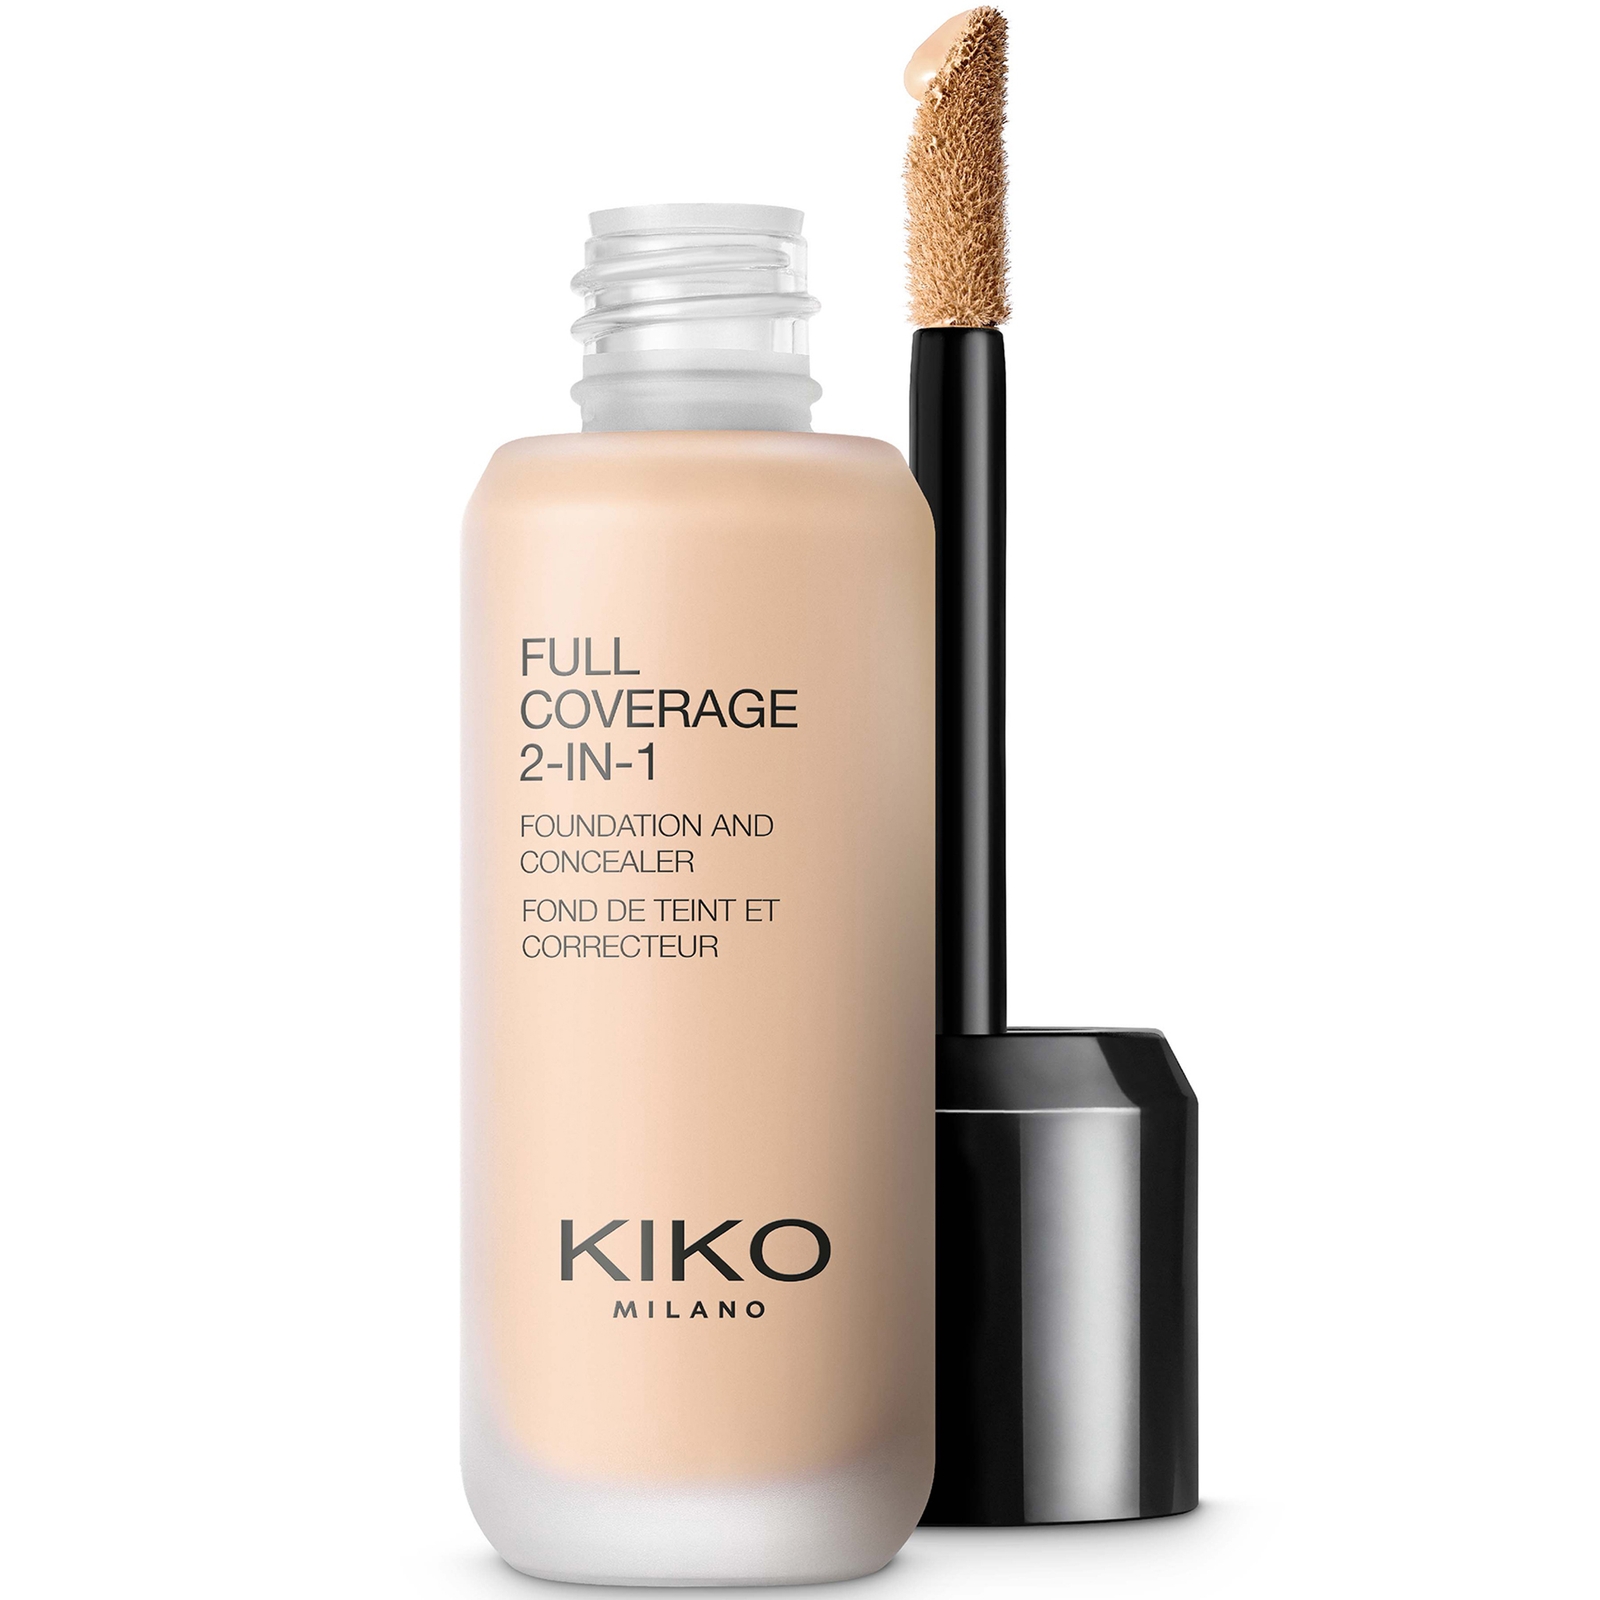 KIKO Milano Full Coverage 2-in-1 Foundation and Concealer 25ml (Various Shades) - 10 Warm Rose